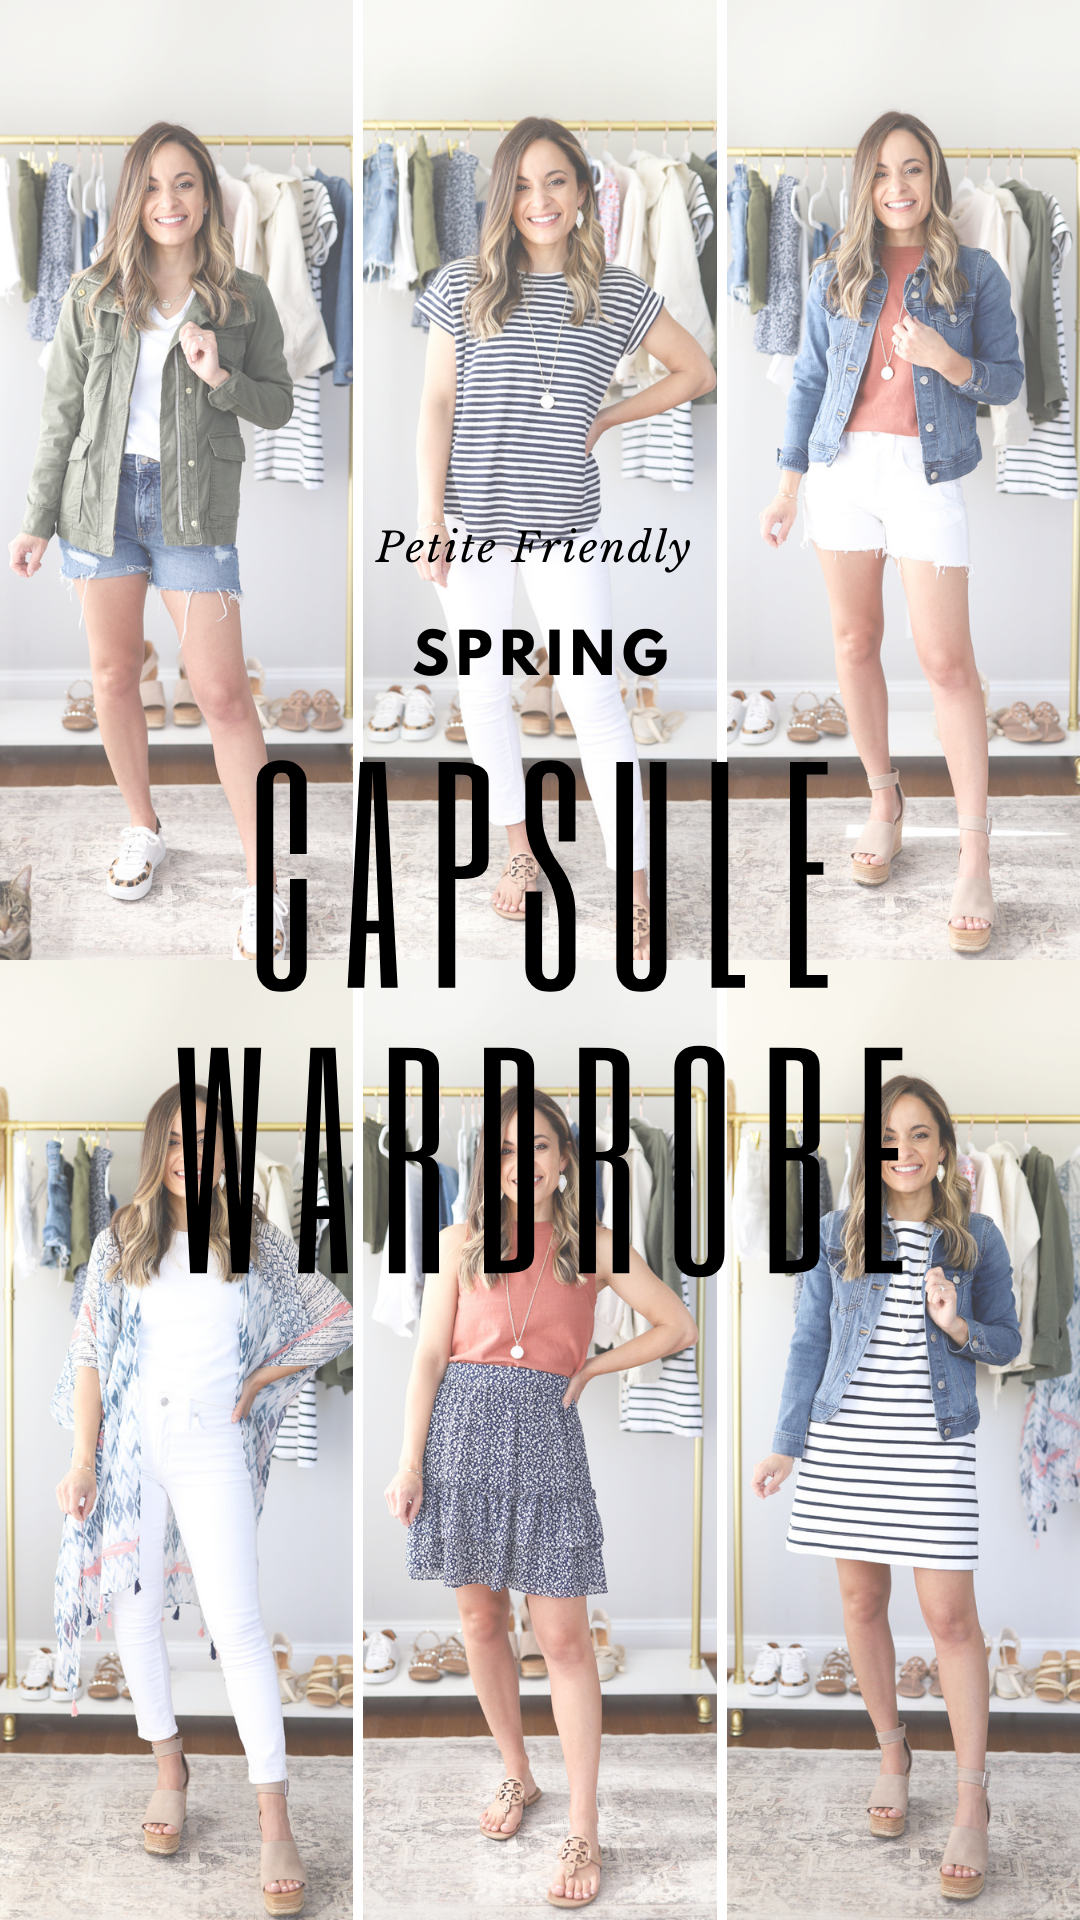 Petite friendly capsule wardrobe | 20 piece capsule wardrobe for spring and summer via pumps and push-ups blog | petite fashion | petite style 